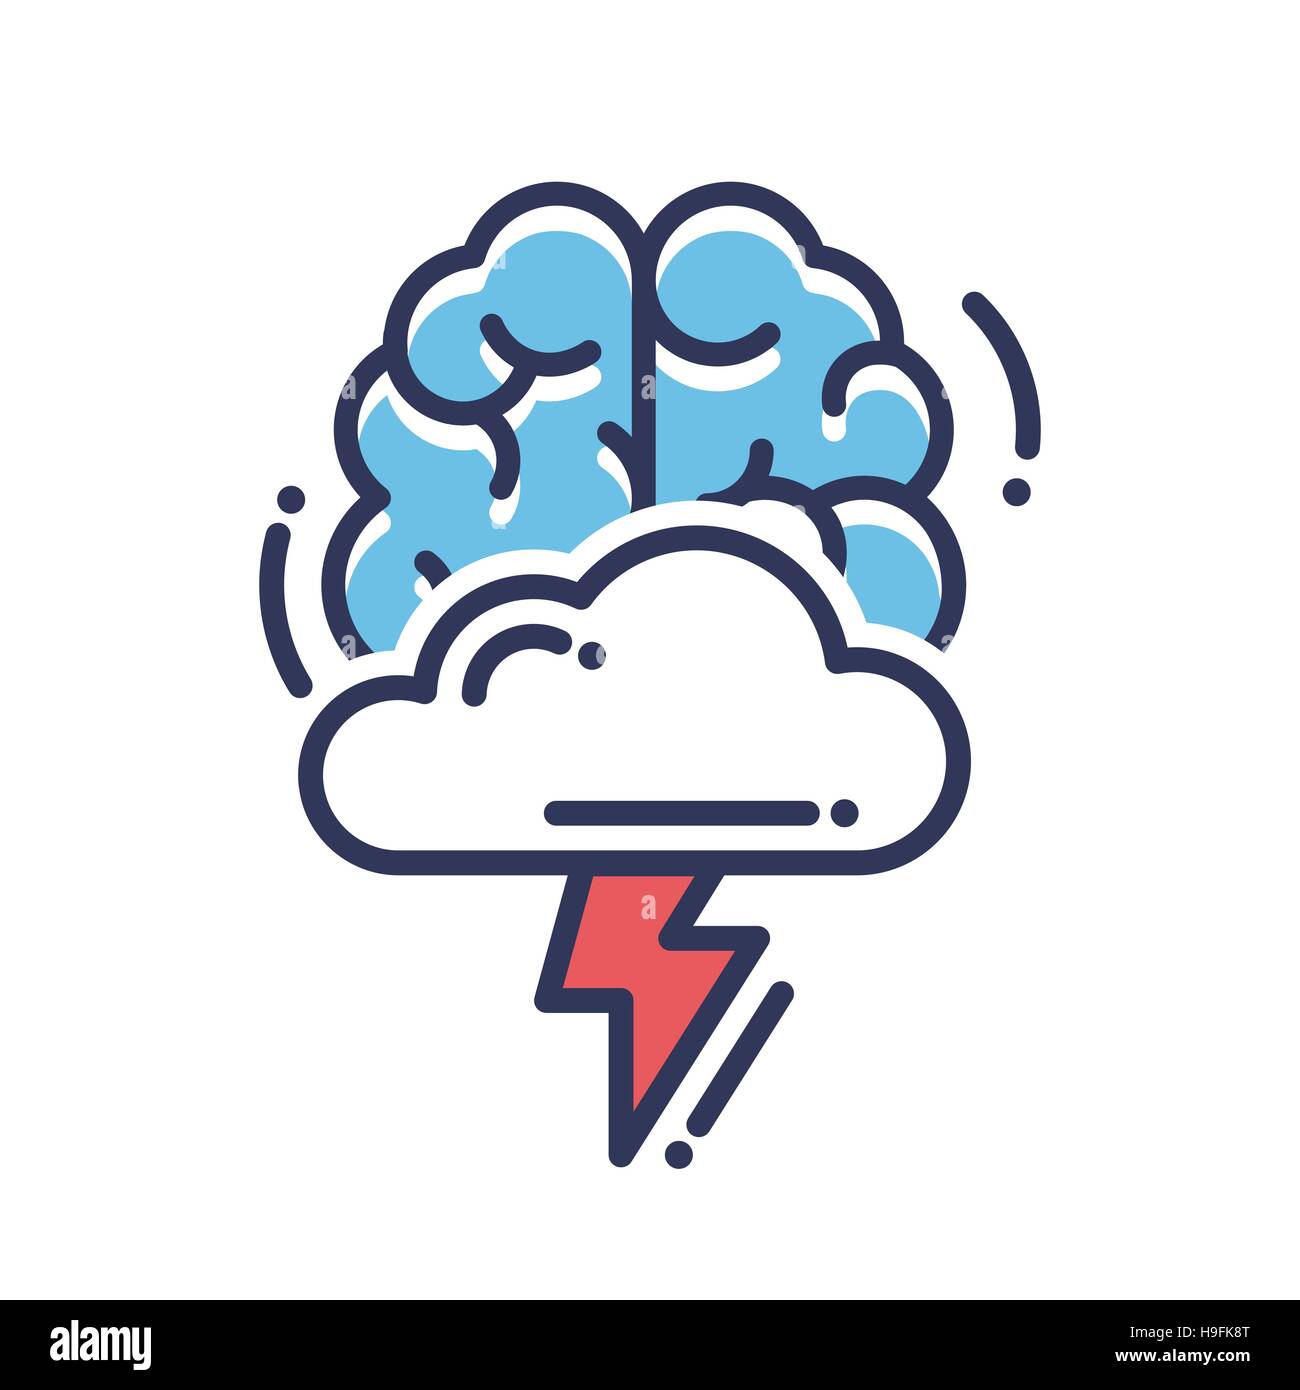 Brainstorming flat design single isolated icon Stock Vector